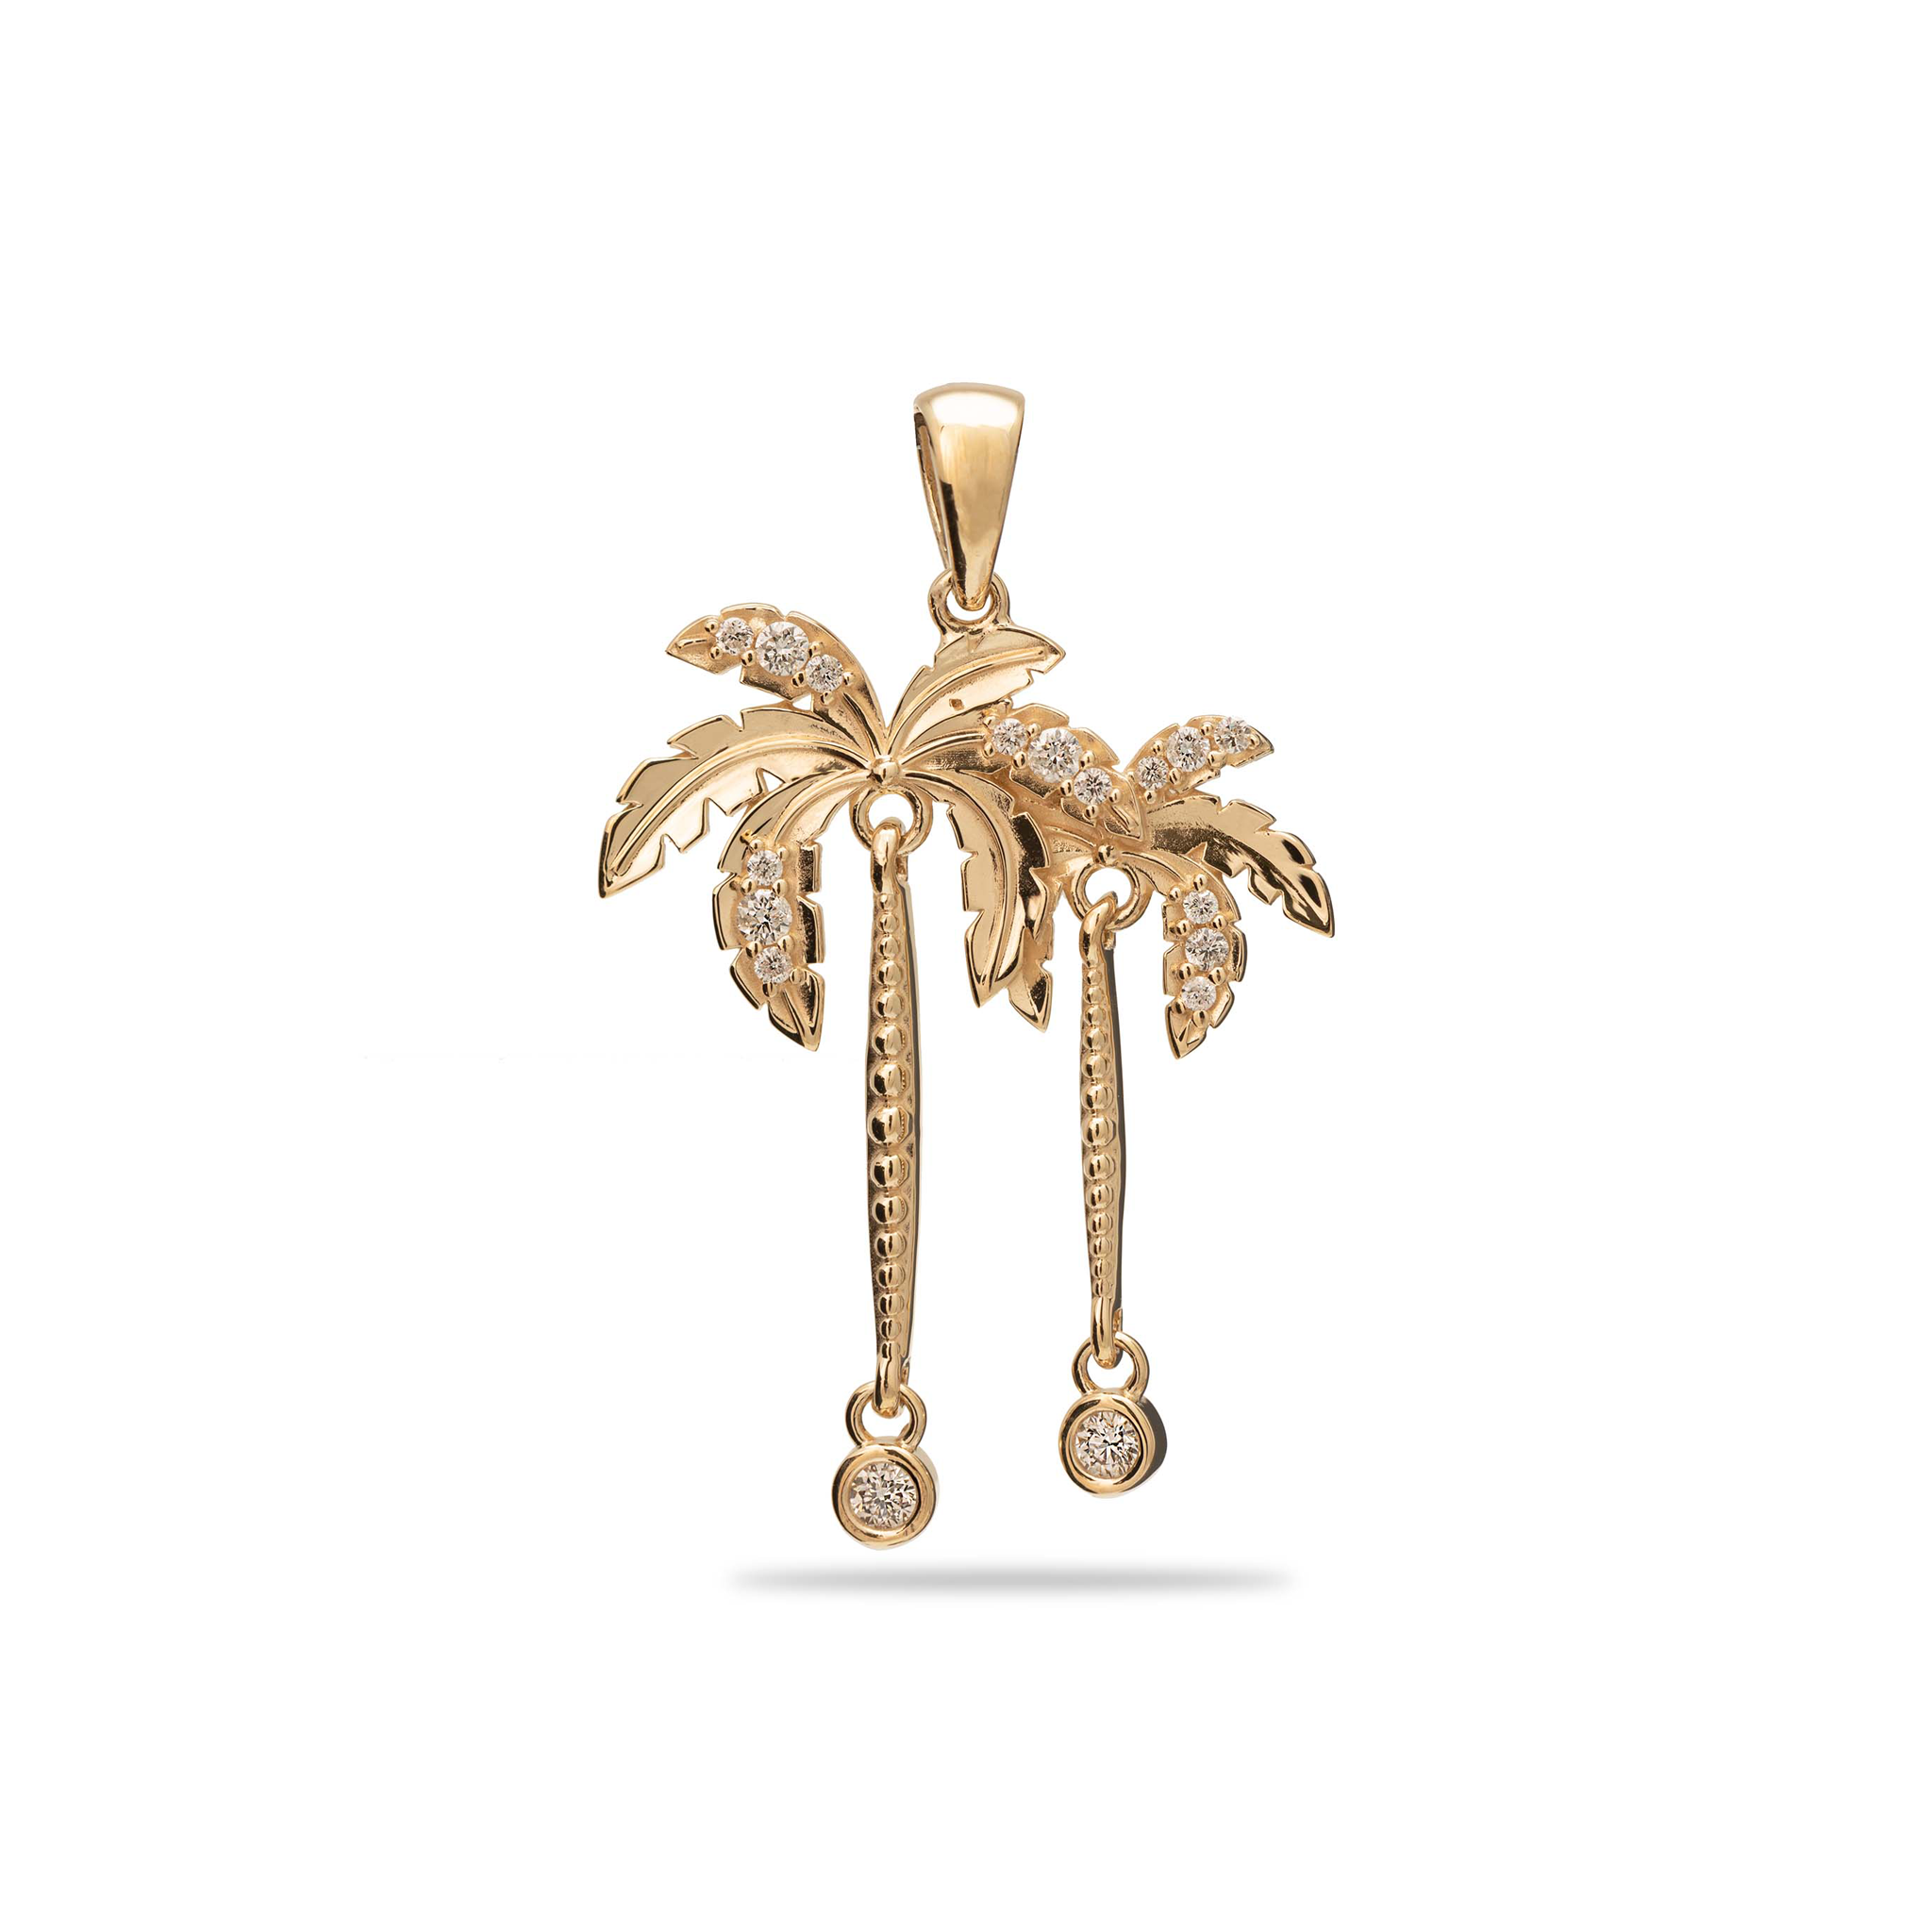 Paradise Palms - Palm Tree Pendant in Gold with Diamonds - 24-28mm